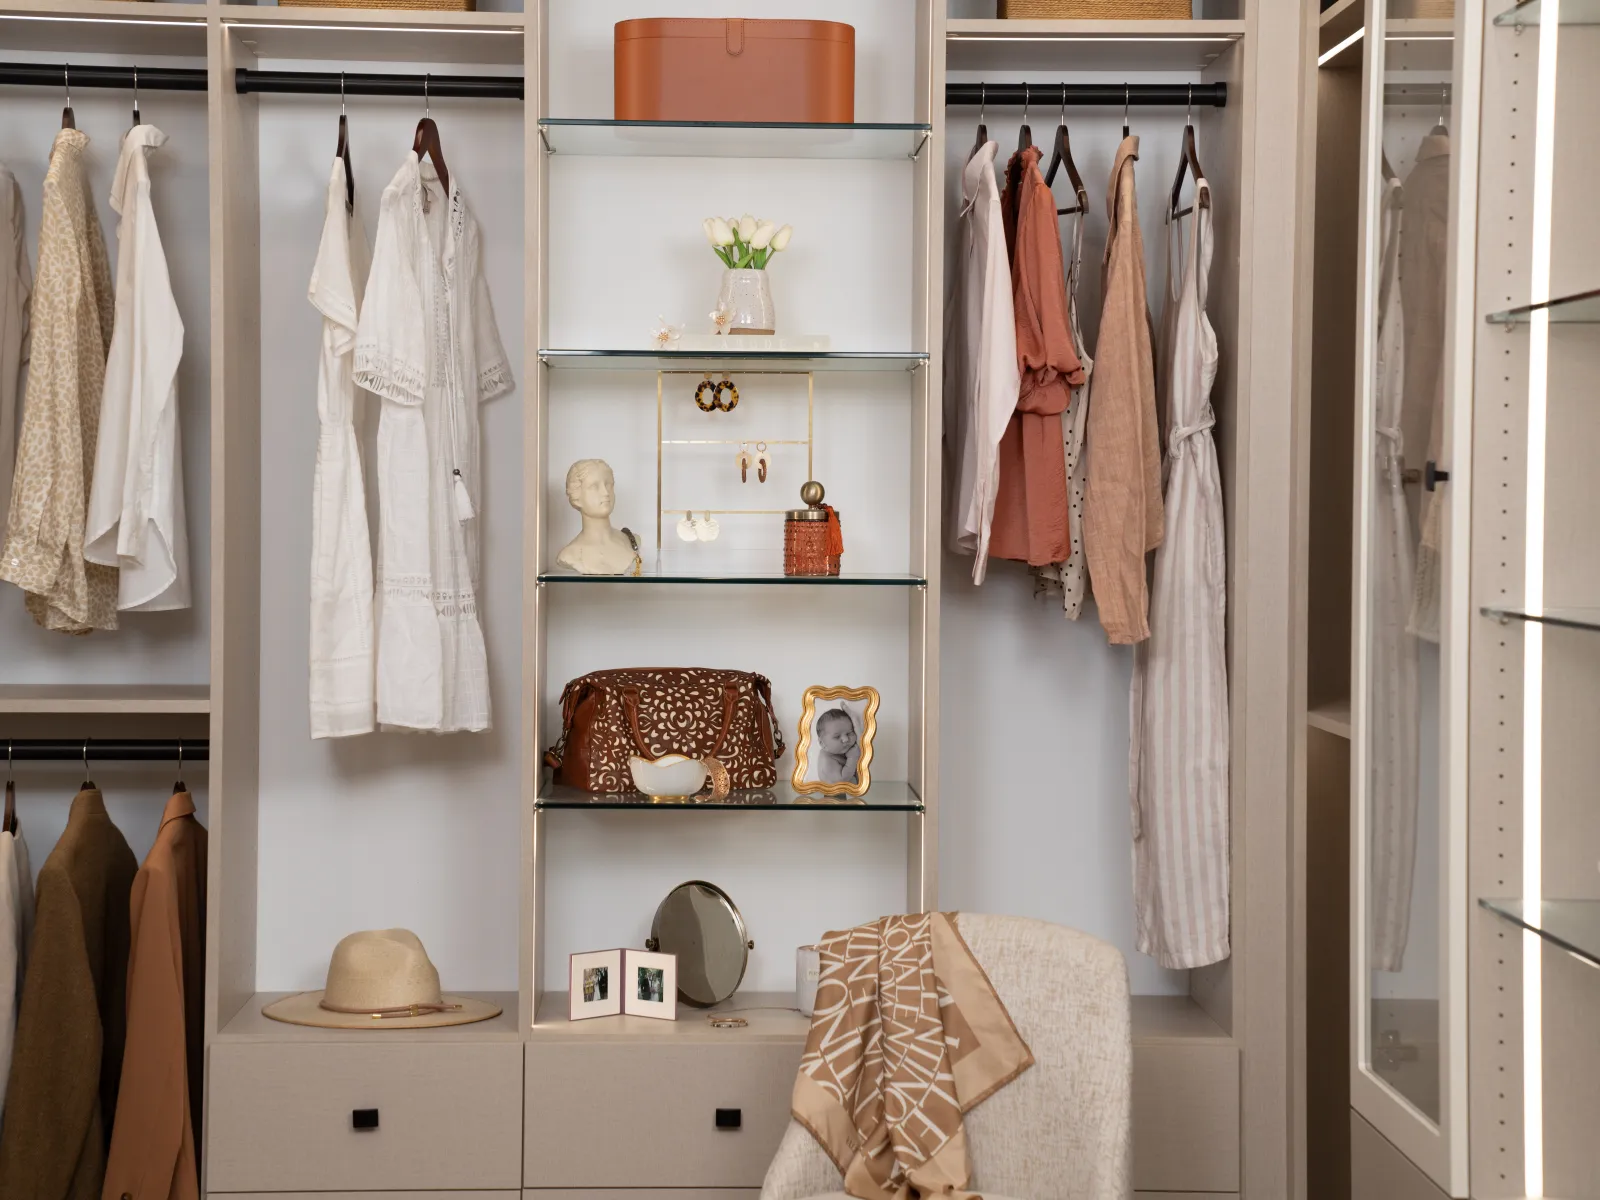 Do we offer a warranty or guarantees on our custom closets?